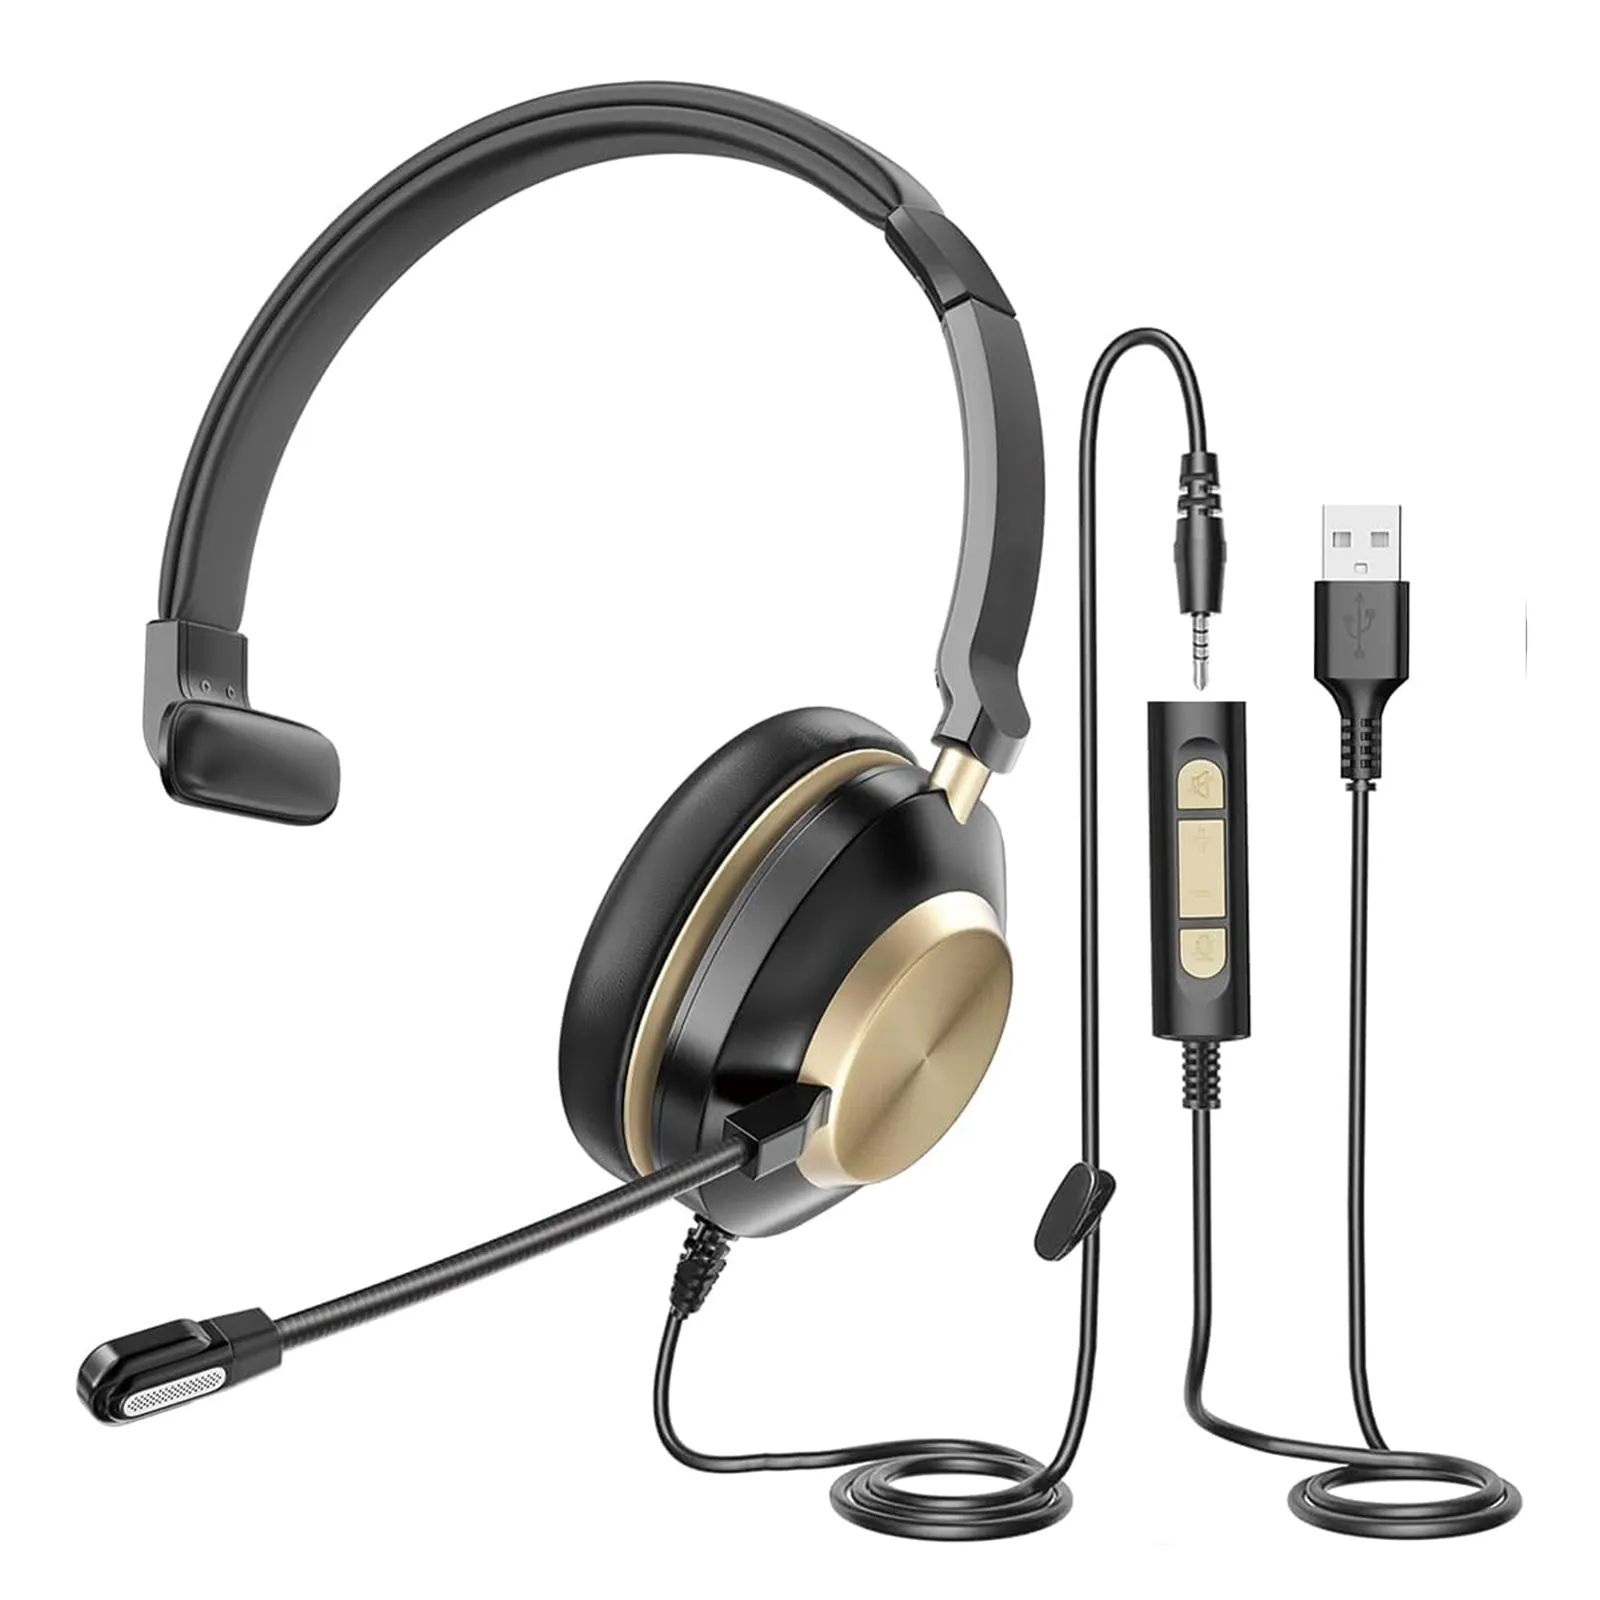 Professional ENC Engonomic Noise Cancellation Headphone Office Business Headset With Mic